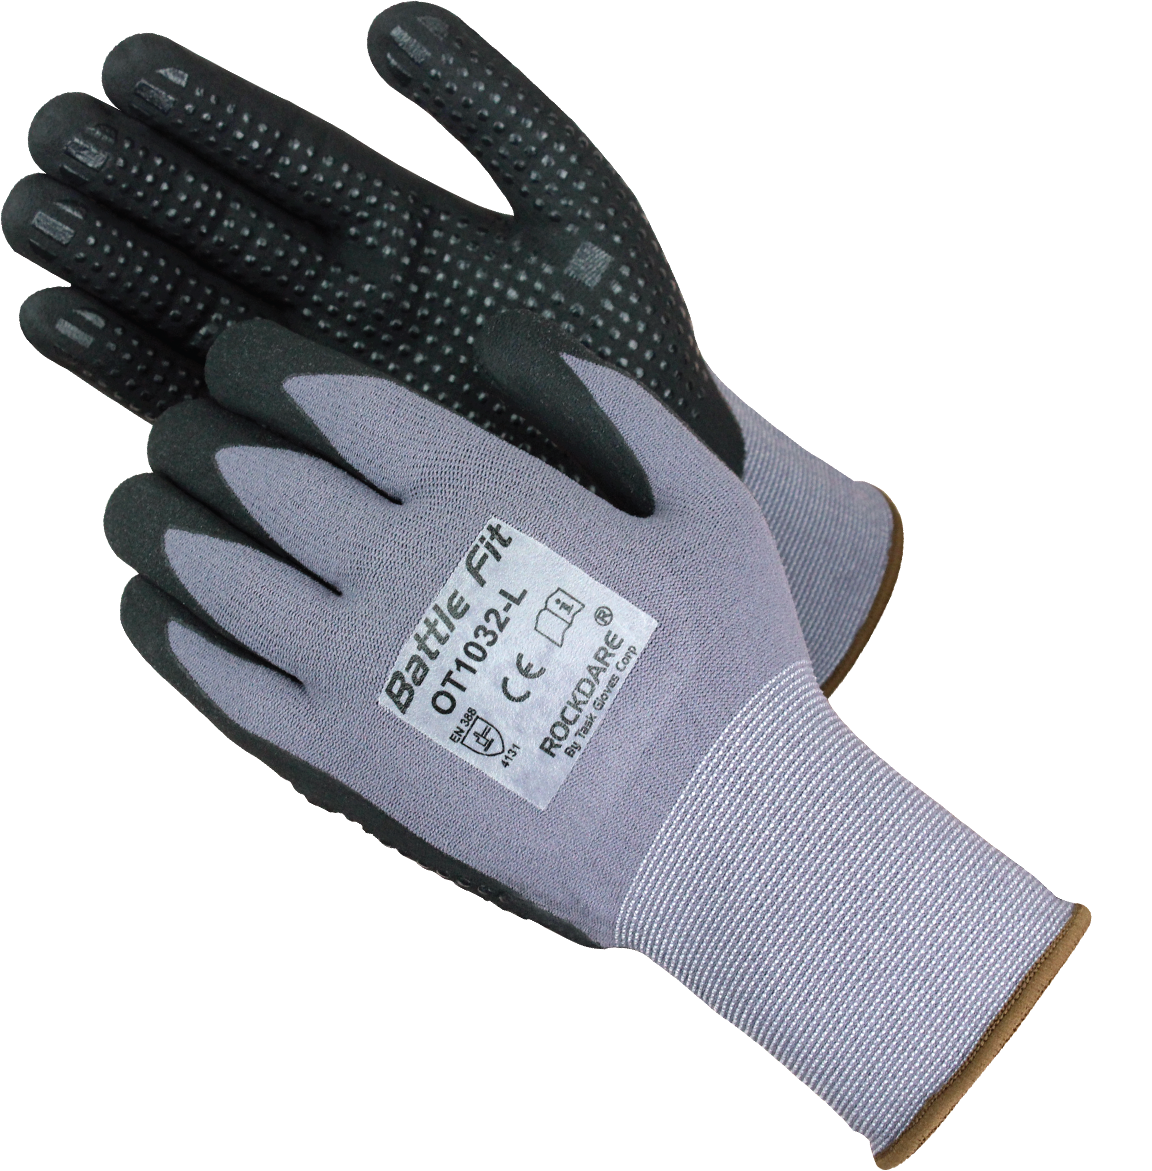 Task Gloves-Black Micro-Foam Nitrile Palm Coated with Nitrile Dots 15G Knit Gloves